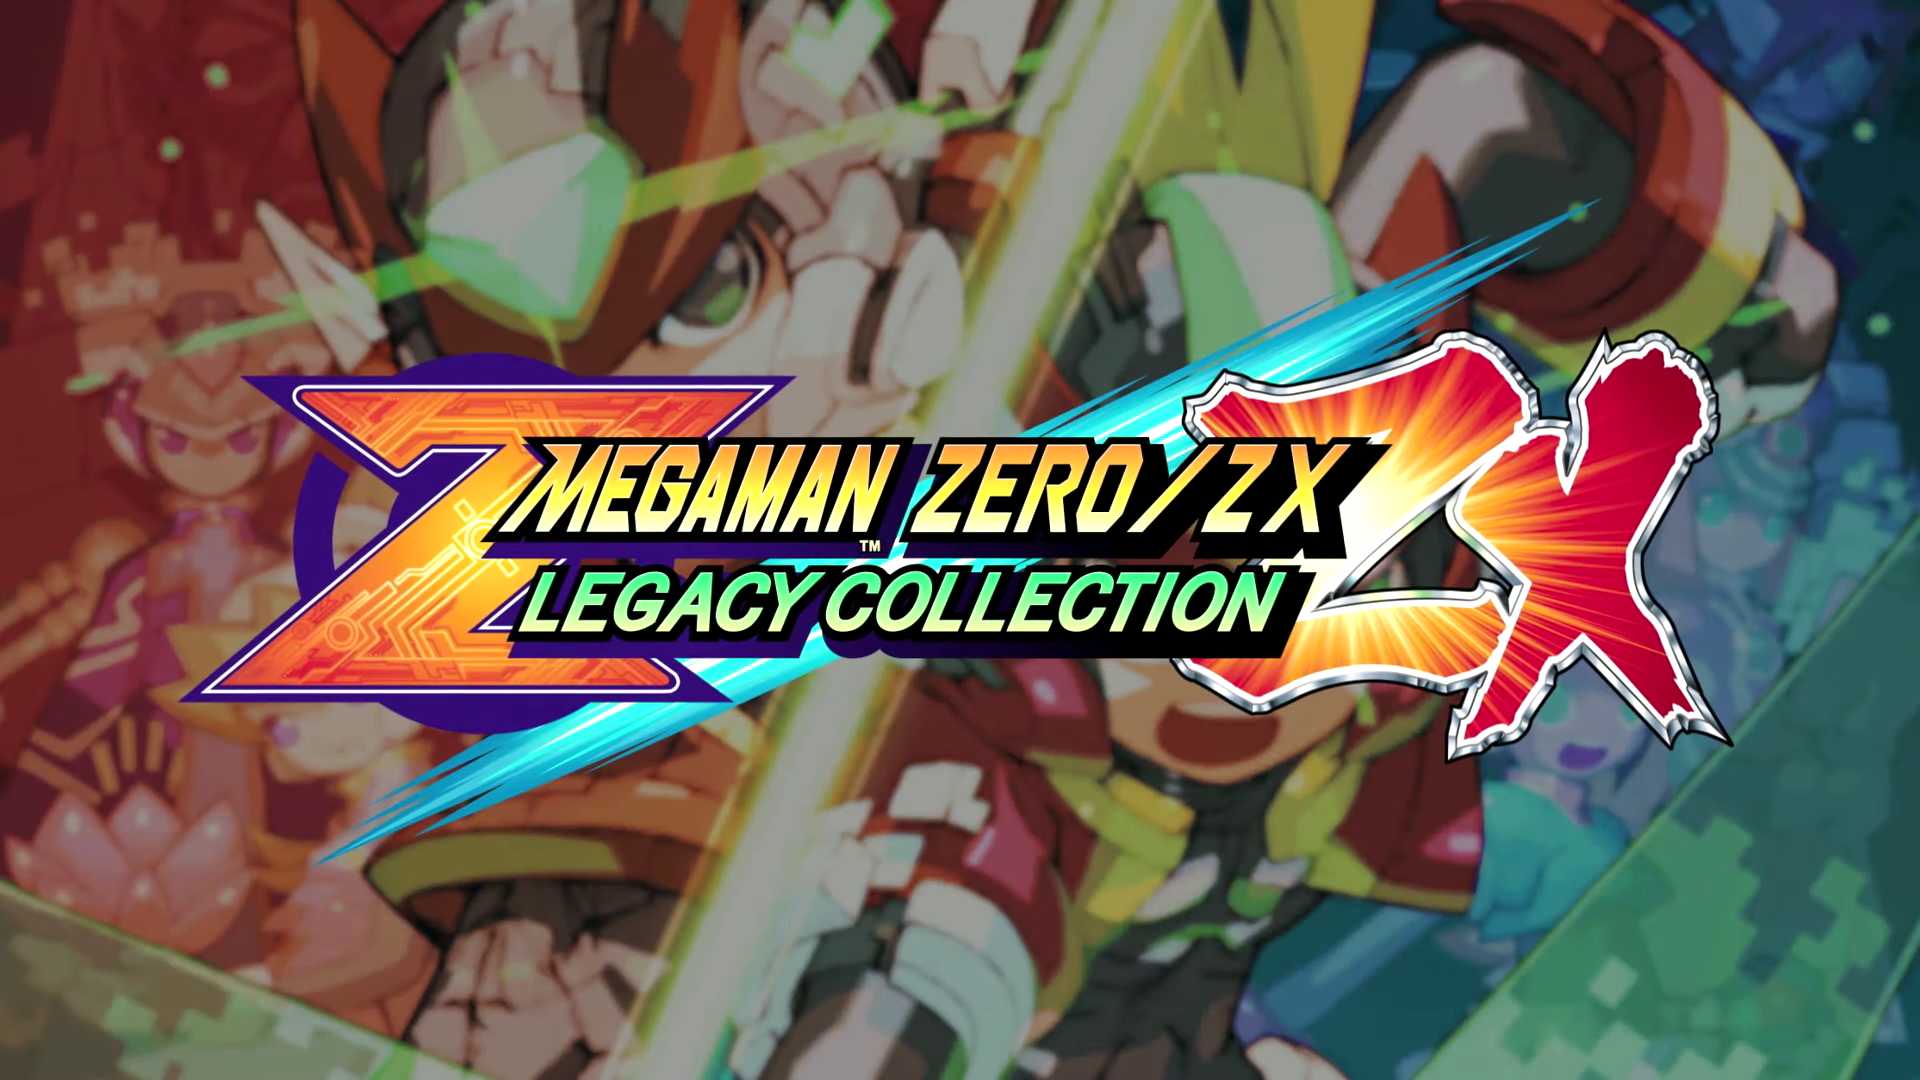 OMG! Mega Man Zero and ZX are getting a Legacy Collection!